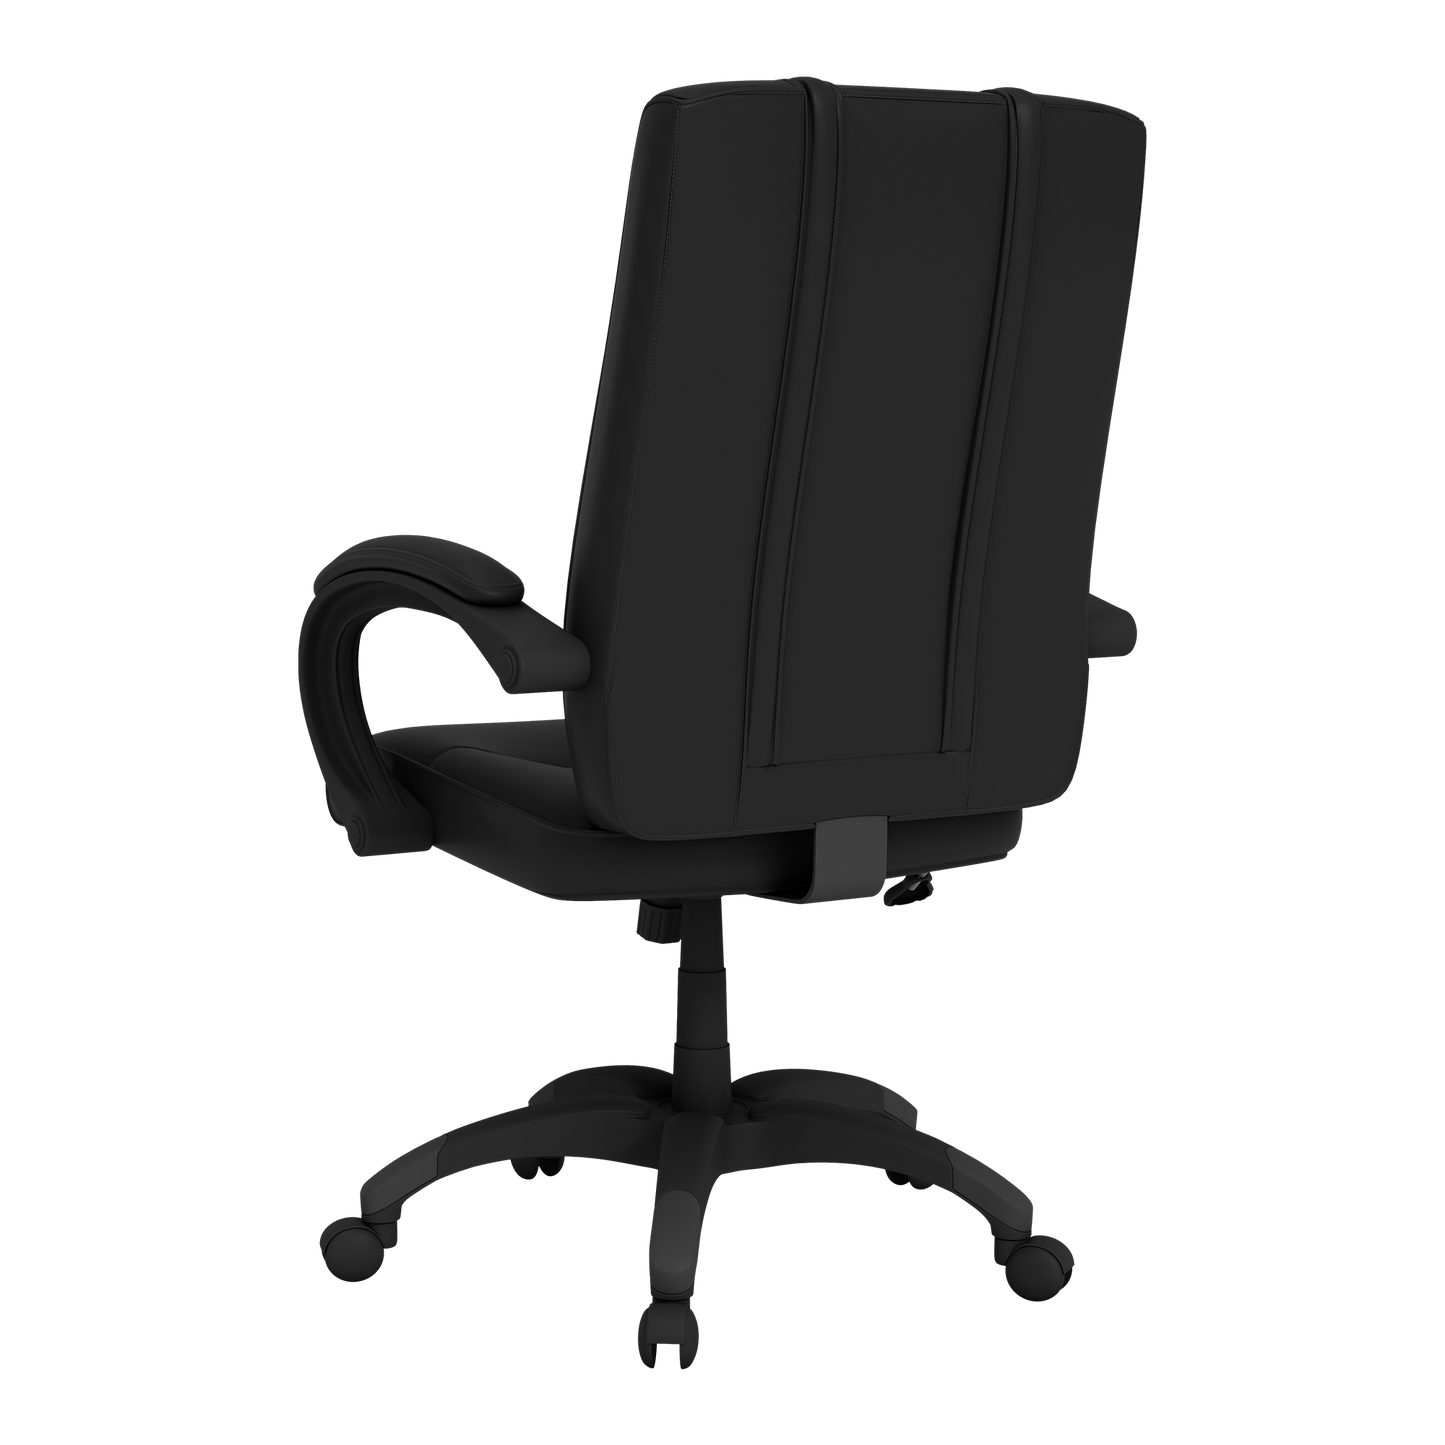 Office Chair 1000 with Washington Wizards Team Commemorative Logo